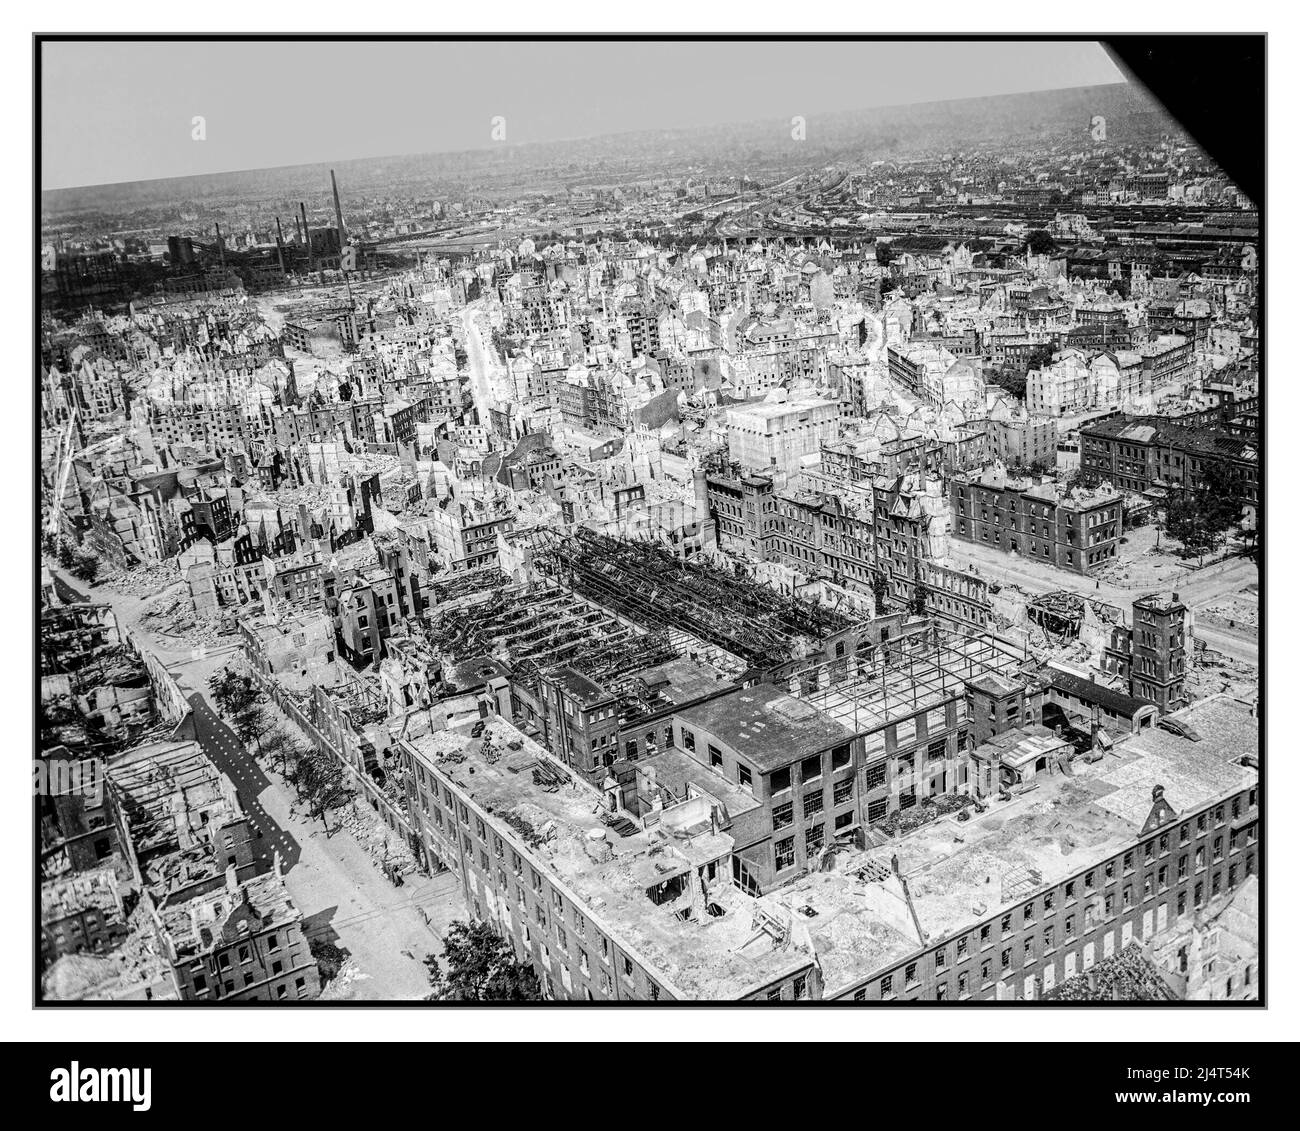 NUREMBERG WW2 Allied Bombing damage devastation arial view at Nuremberg Nazi Germany May 1945 Oblique aerial view of heavily-damaged industrial and residential buildings in Nuremberg. Visible at the centre of the photo is a multi-story above-ground air raid bunker. At the bottom of the photo, below the bunker, is the Siemens plant. Top left is the gas works in Nürnberg-Sandreuth, top right is the main station (Hauptbahnhof) Date Taken on 28 May 1945 ( 3 weeks after the unconditional surrender by Nazi Germany) Stock Photo